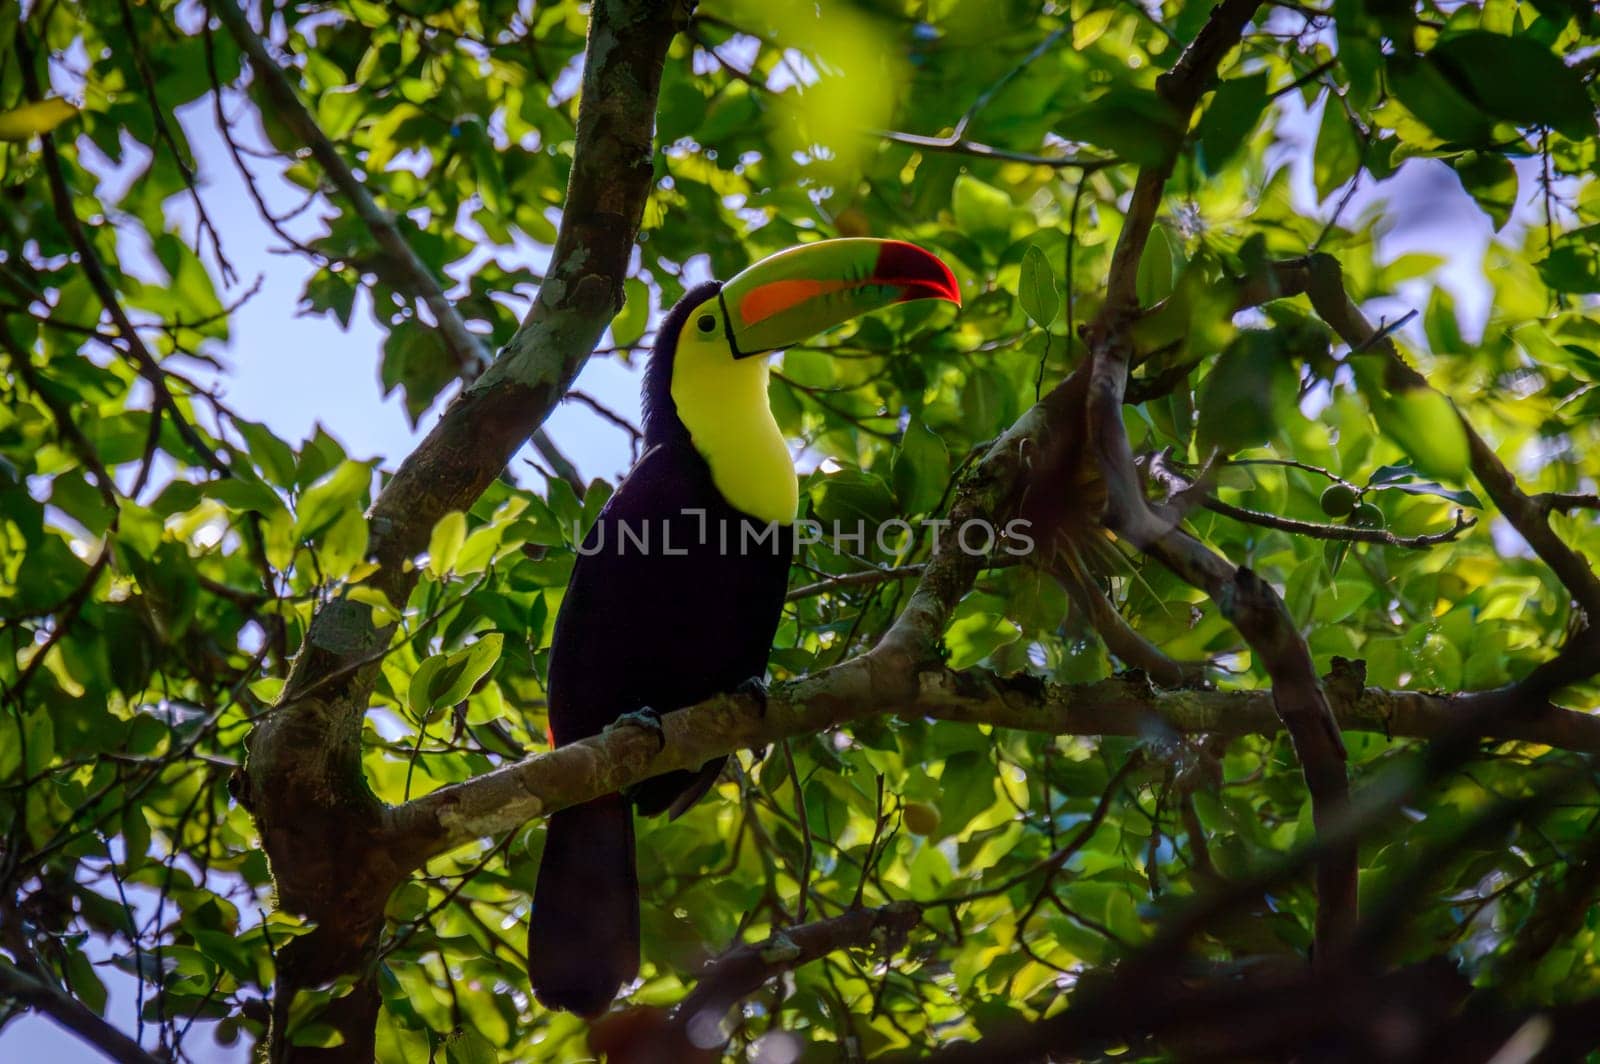 Wild Keel Billed Toucan, Ramphastos sulfuratus, Sitting in Tree Campeche, Mexico by RobertPB